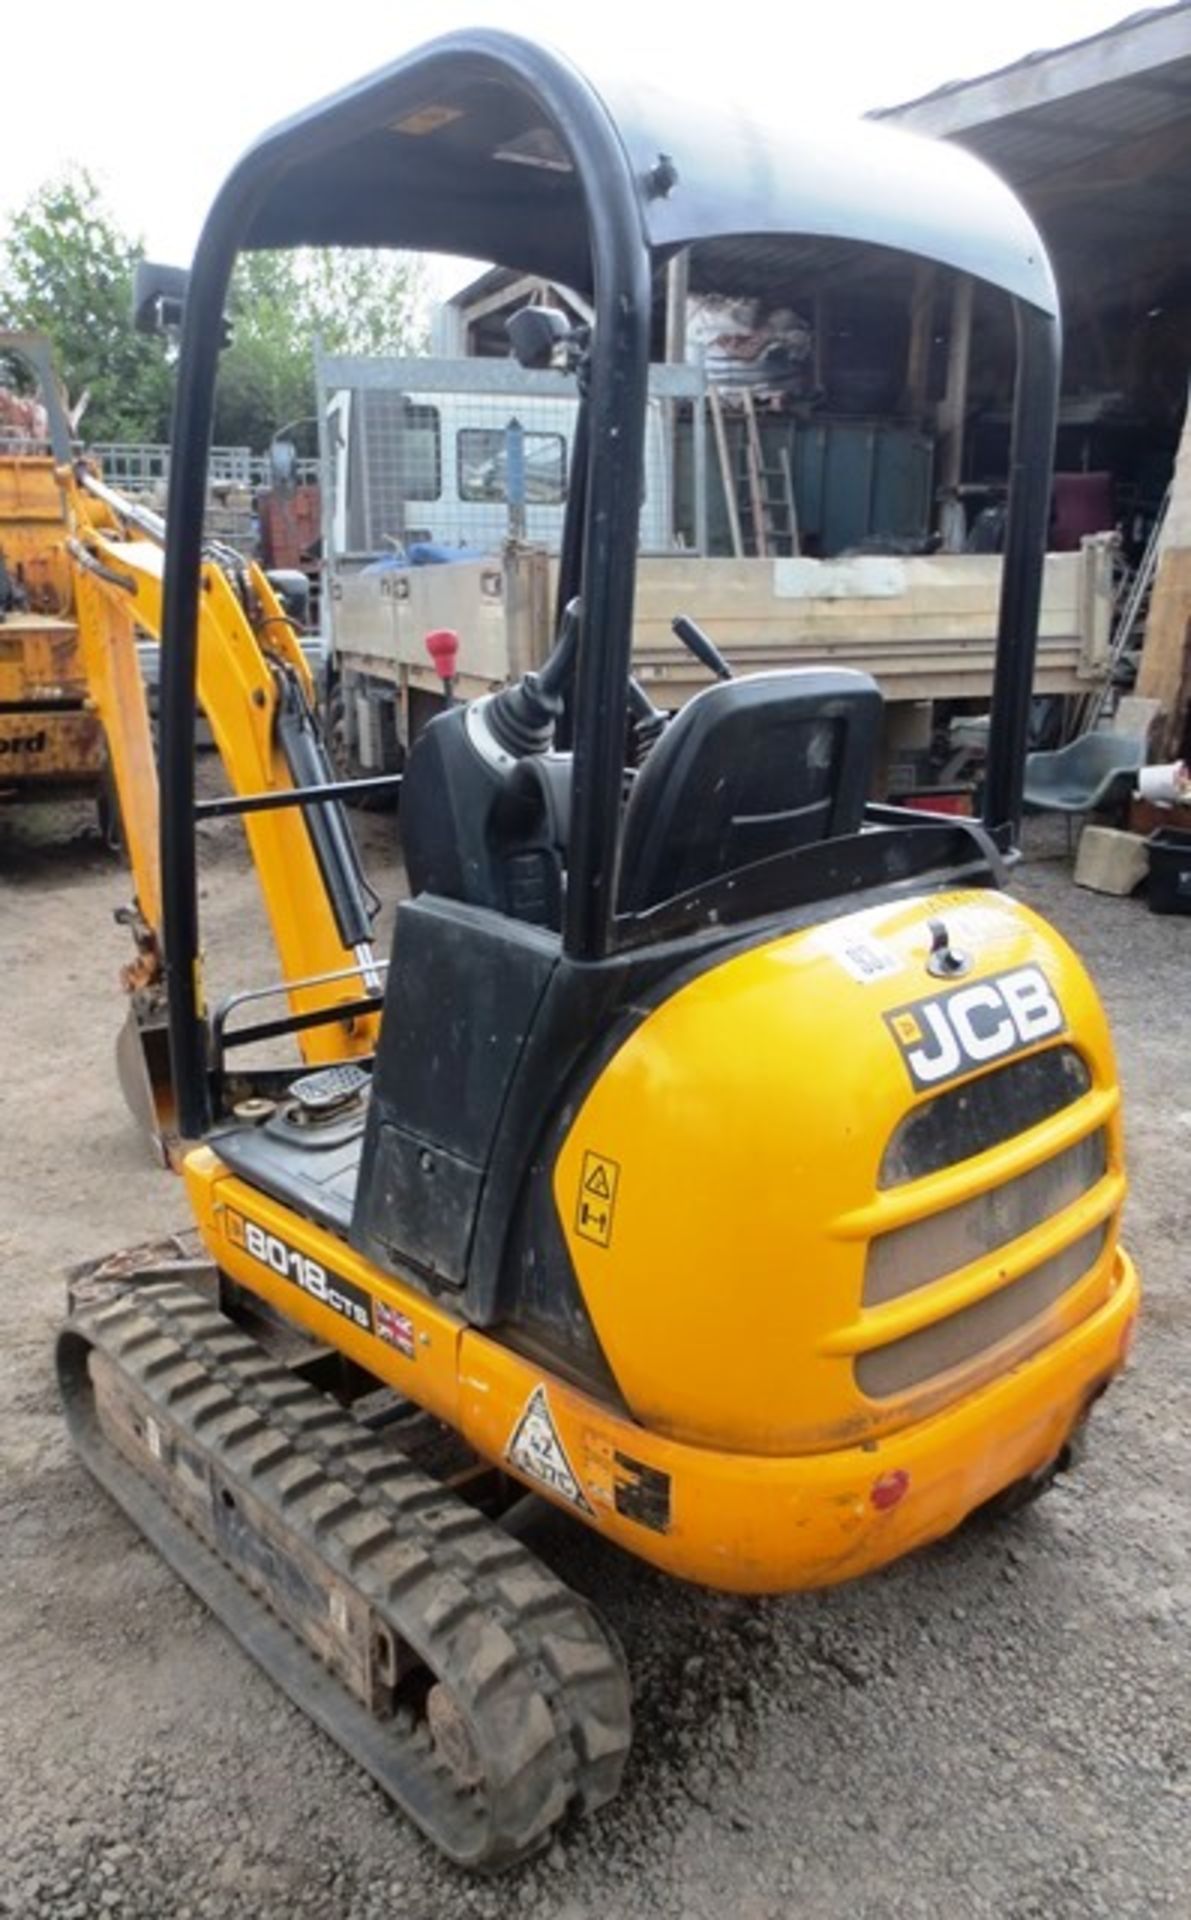 JCB 8018CTS rubber tracked mini hydraulic excavator with front dozer, product ID No: - Image 2 of 13